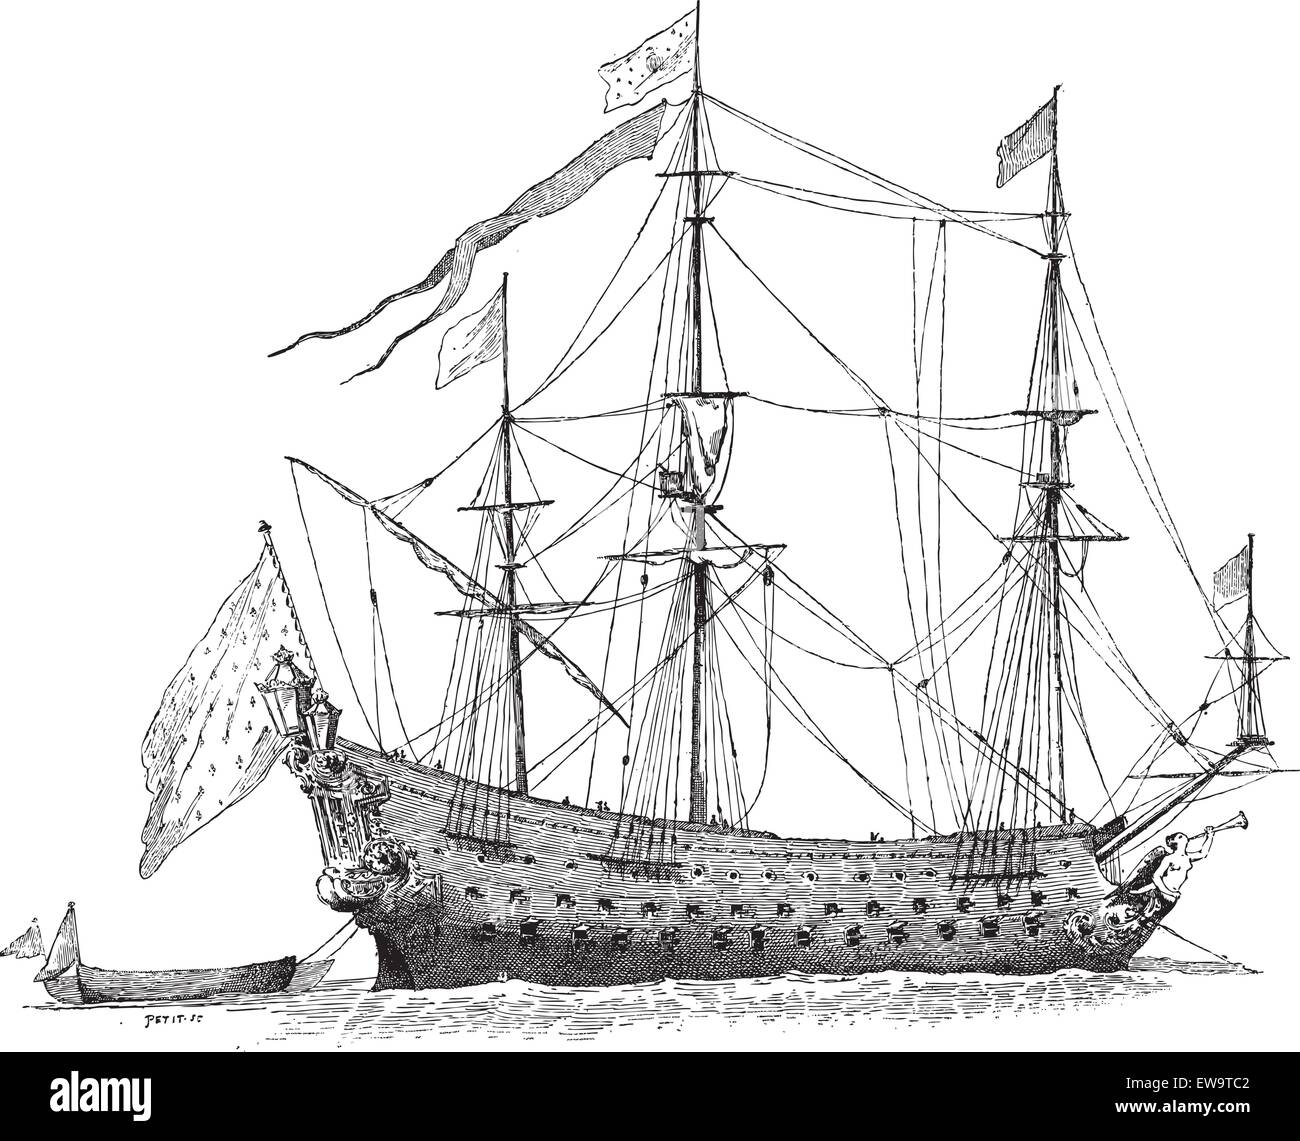 The Soleil-Royal, French Ship, during the 17th Century, vintage engraved illustration. Dictionary of Words and Things - Larive and Fleury - 1895 Stock Vector